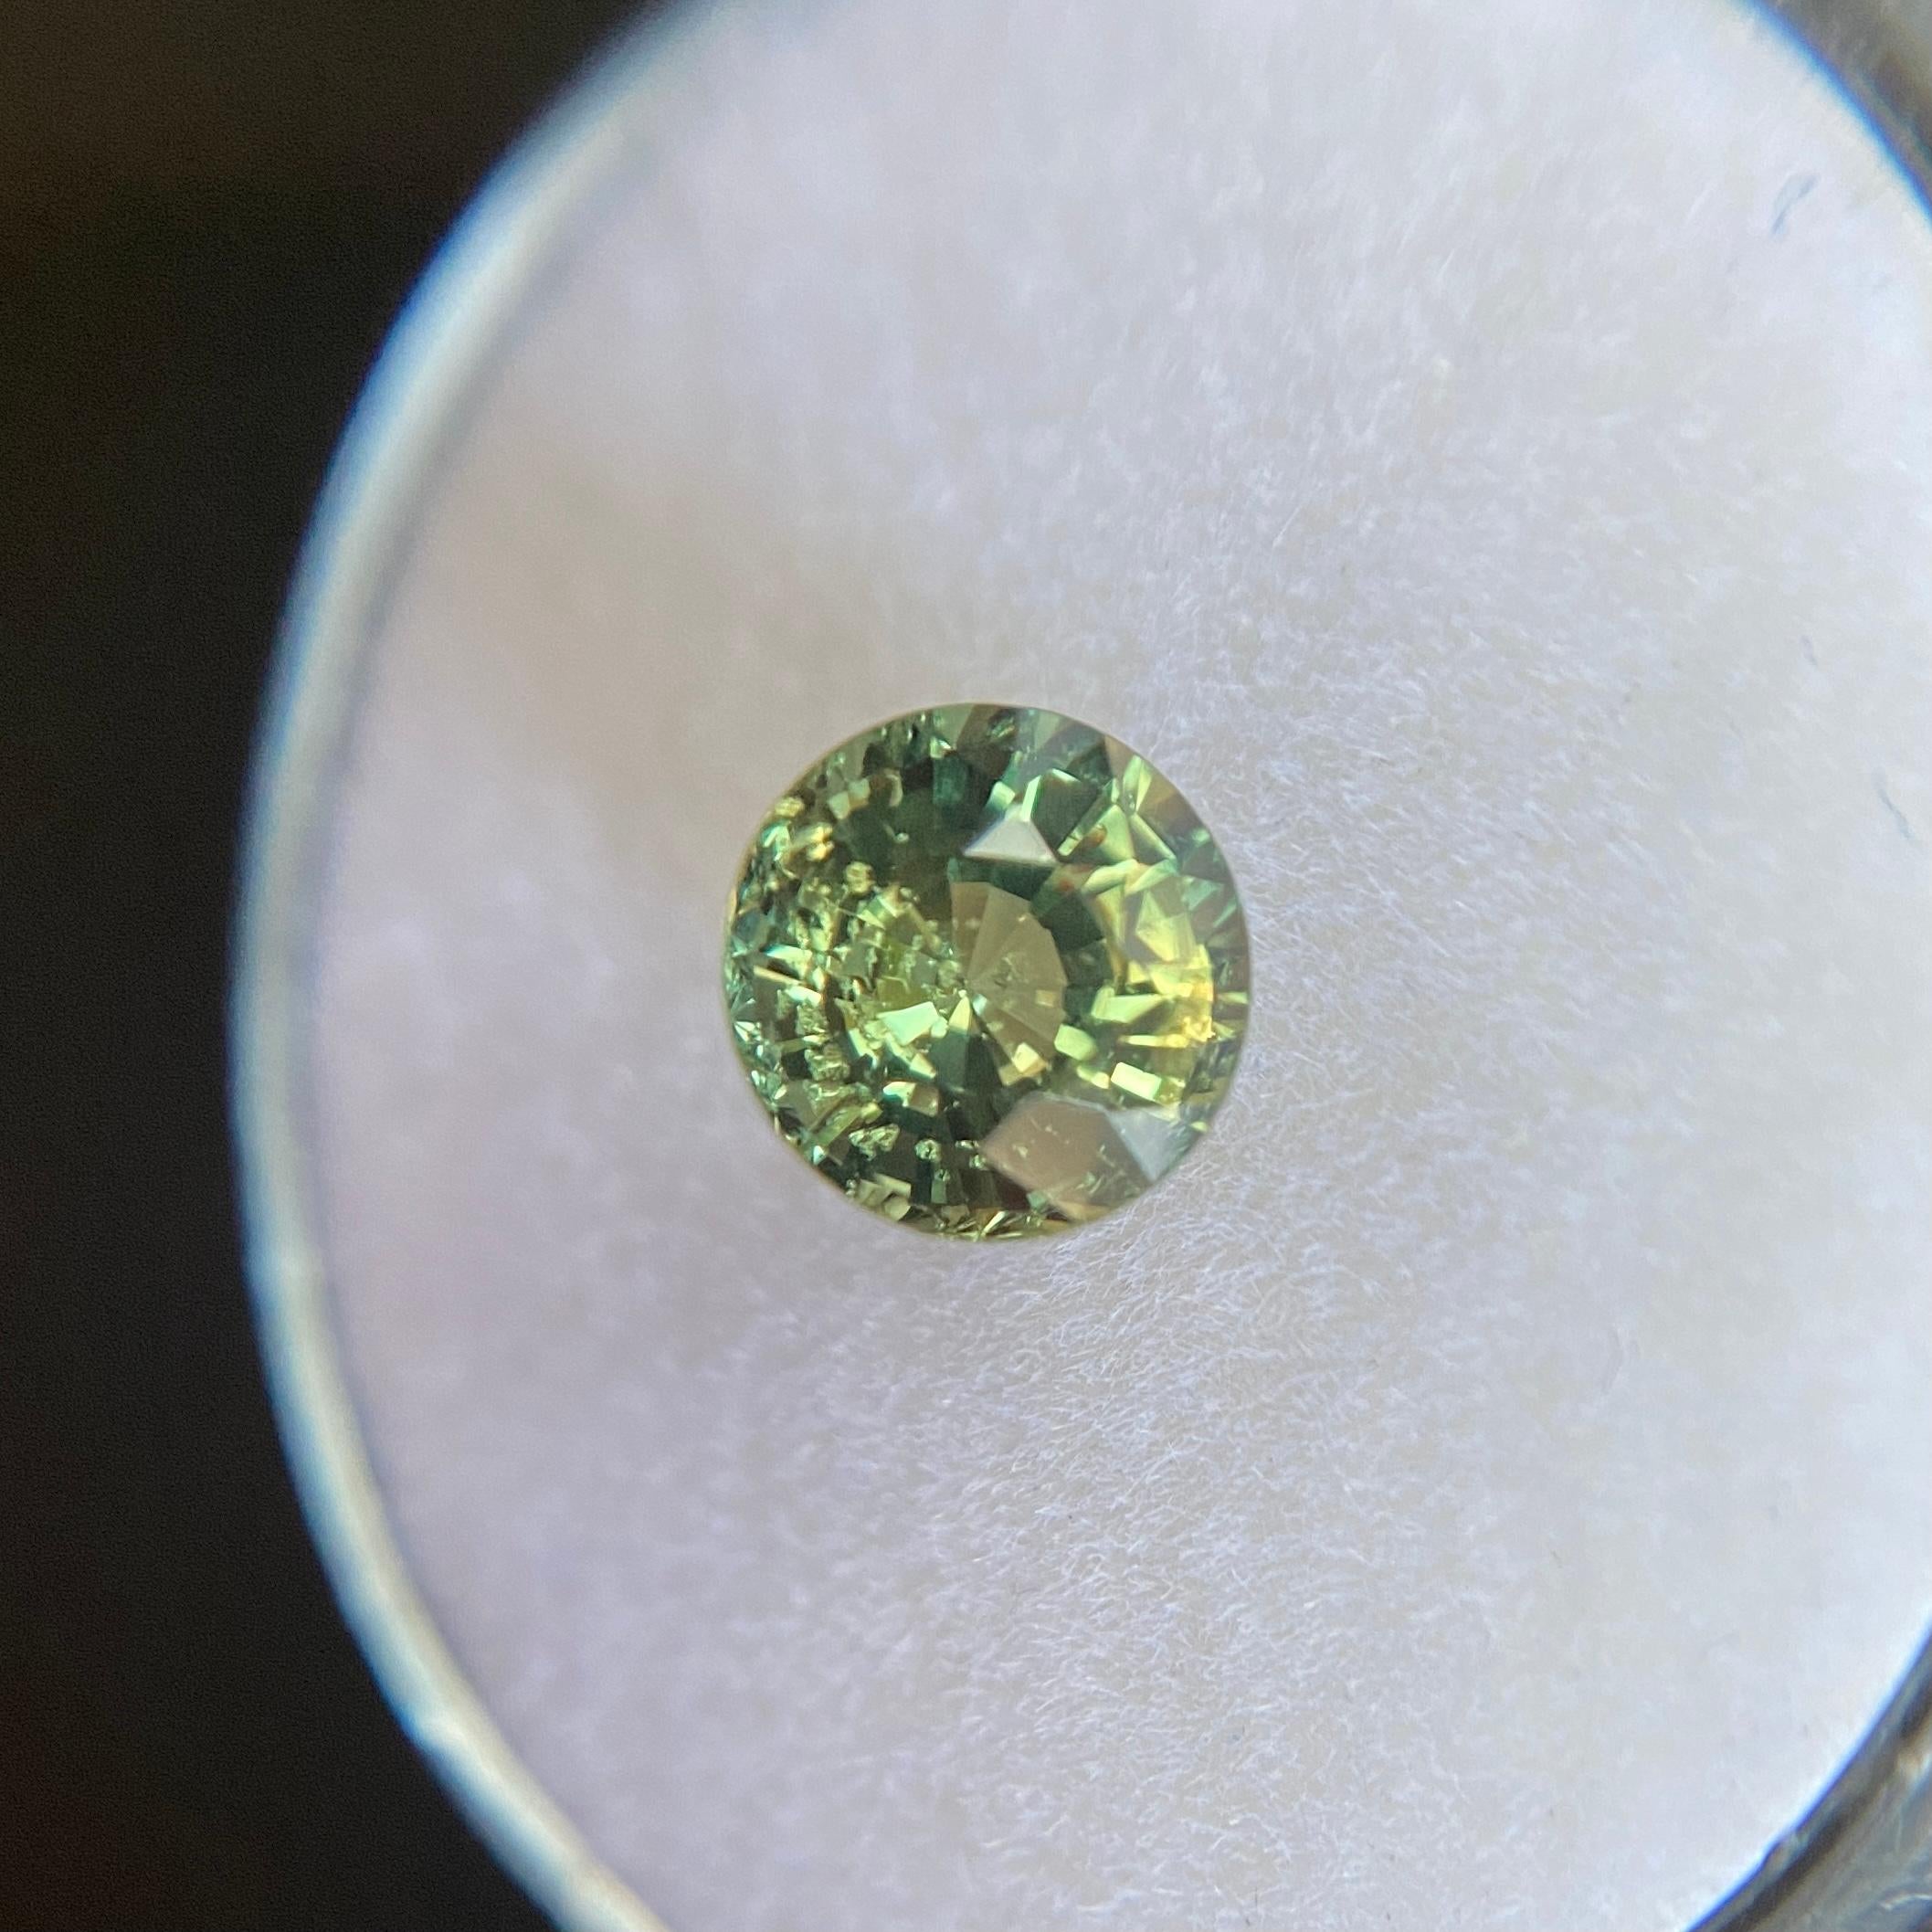 Men's GIA Certified 1.36ct Untreated Vivid Green Yellow Sapphire Round Diamond Cut Gem For Sale